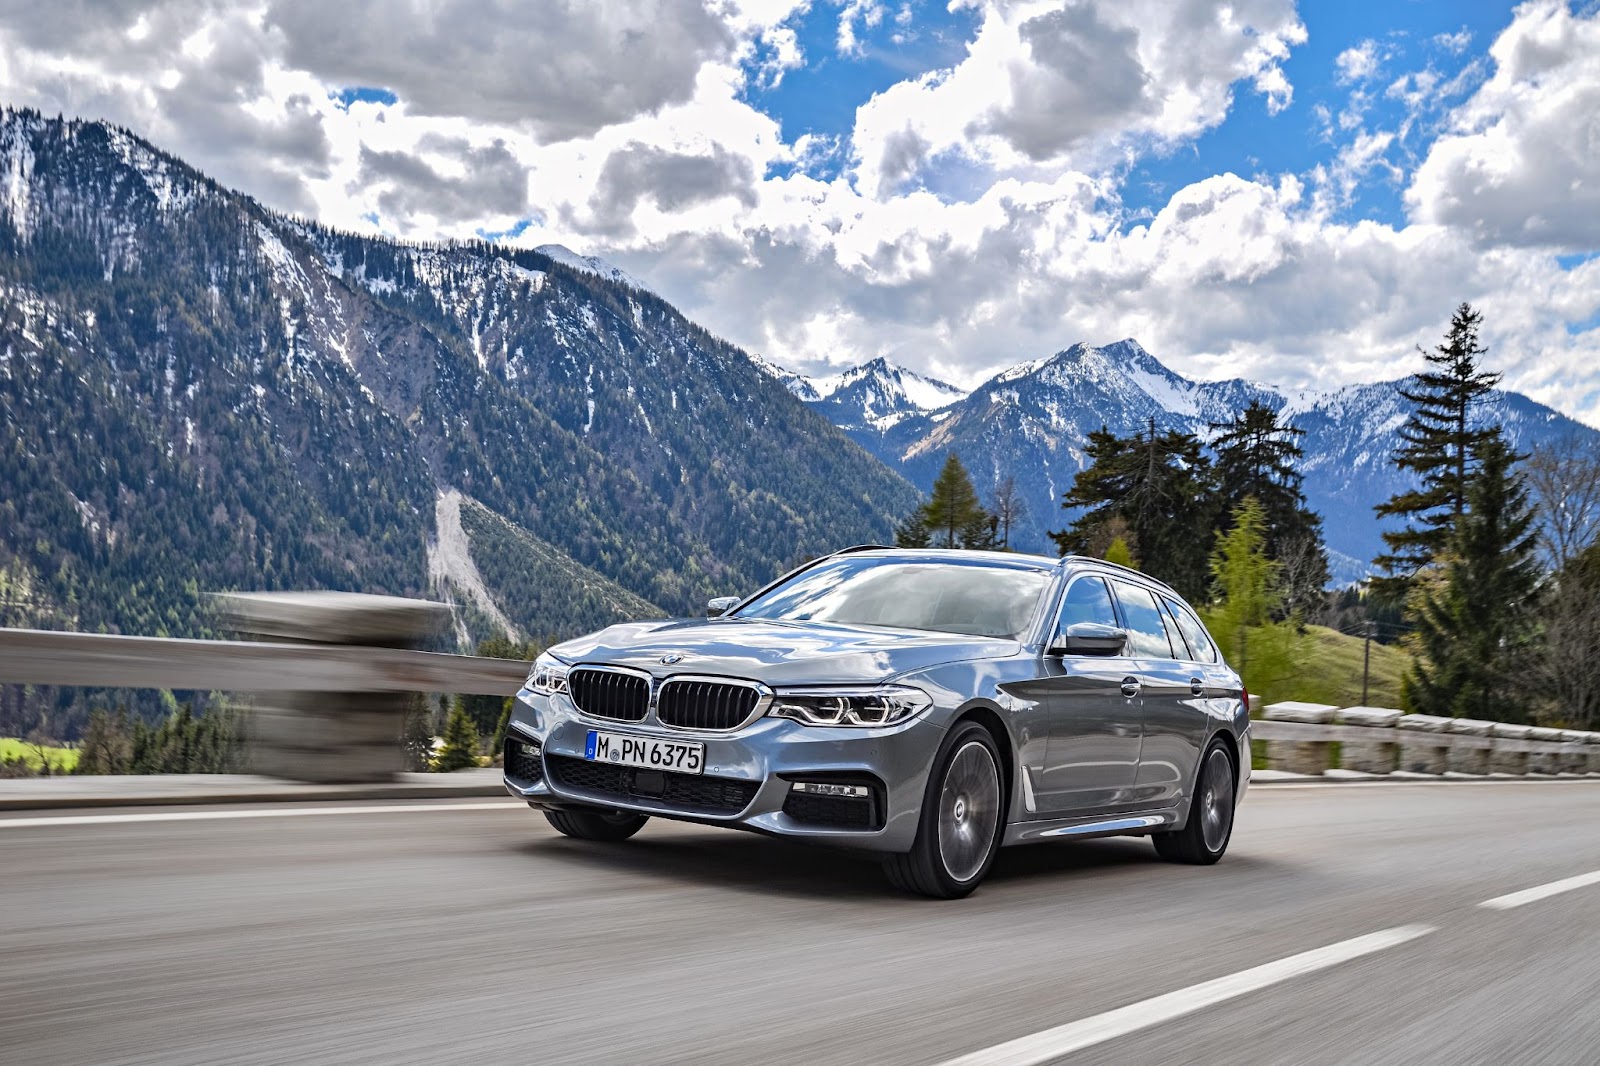 BMW 5 Series on a mountain road